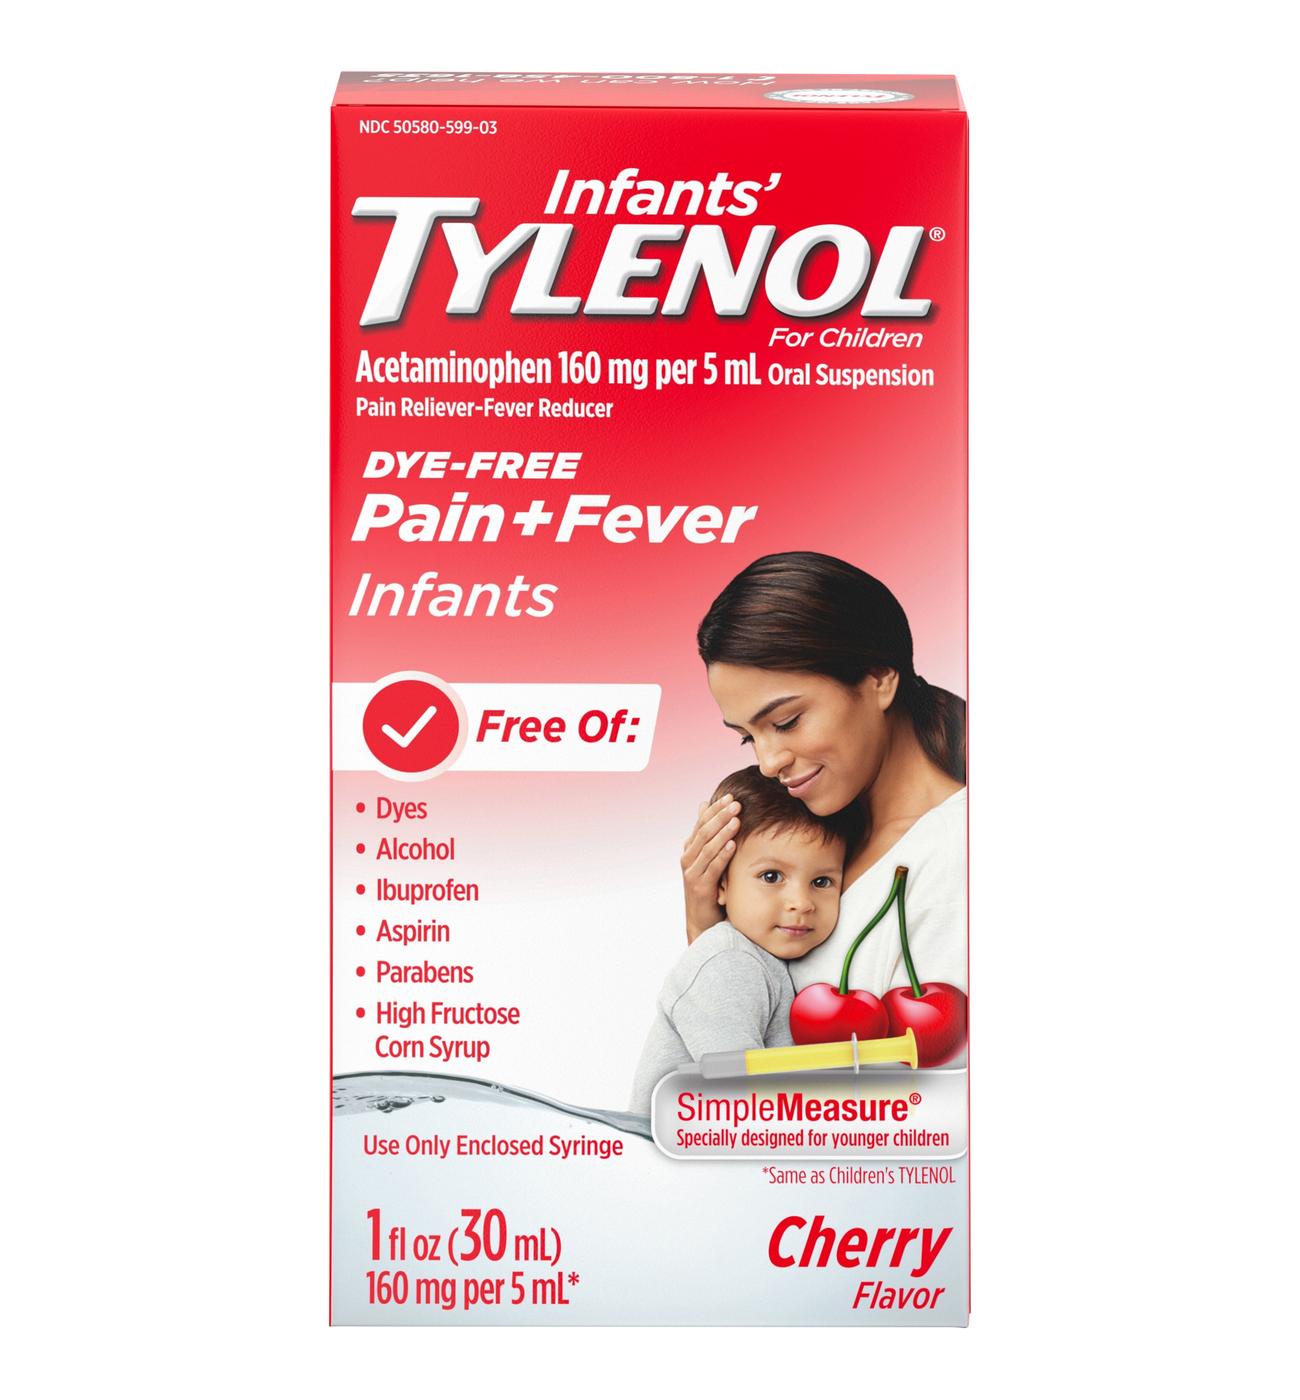 Tylenol Infants' Dye-Free Oral Suspension - Cherry; image 1 of 4